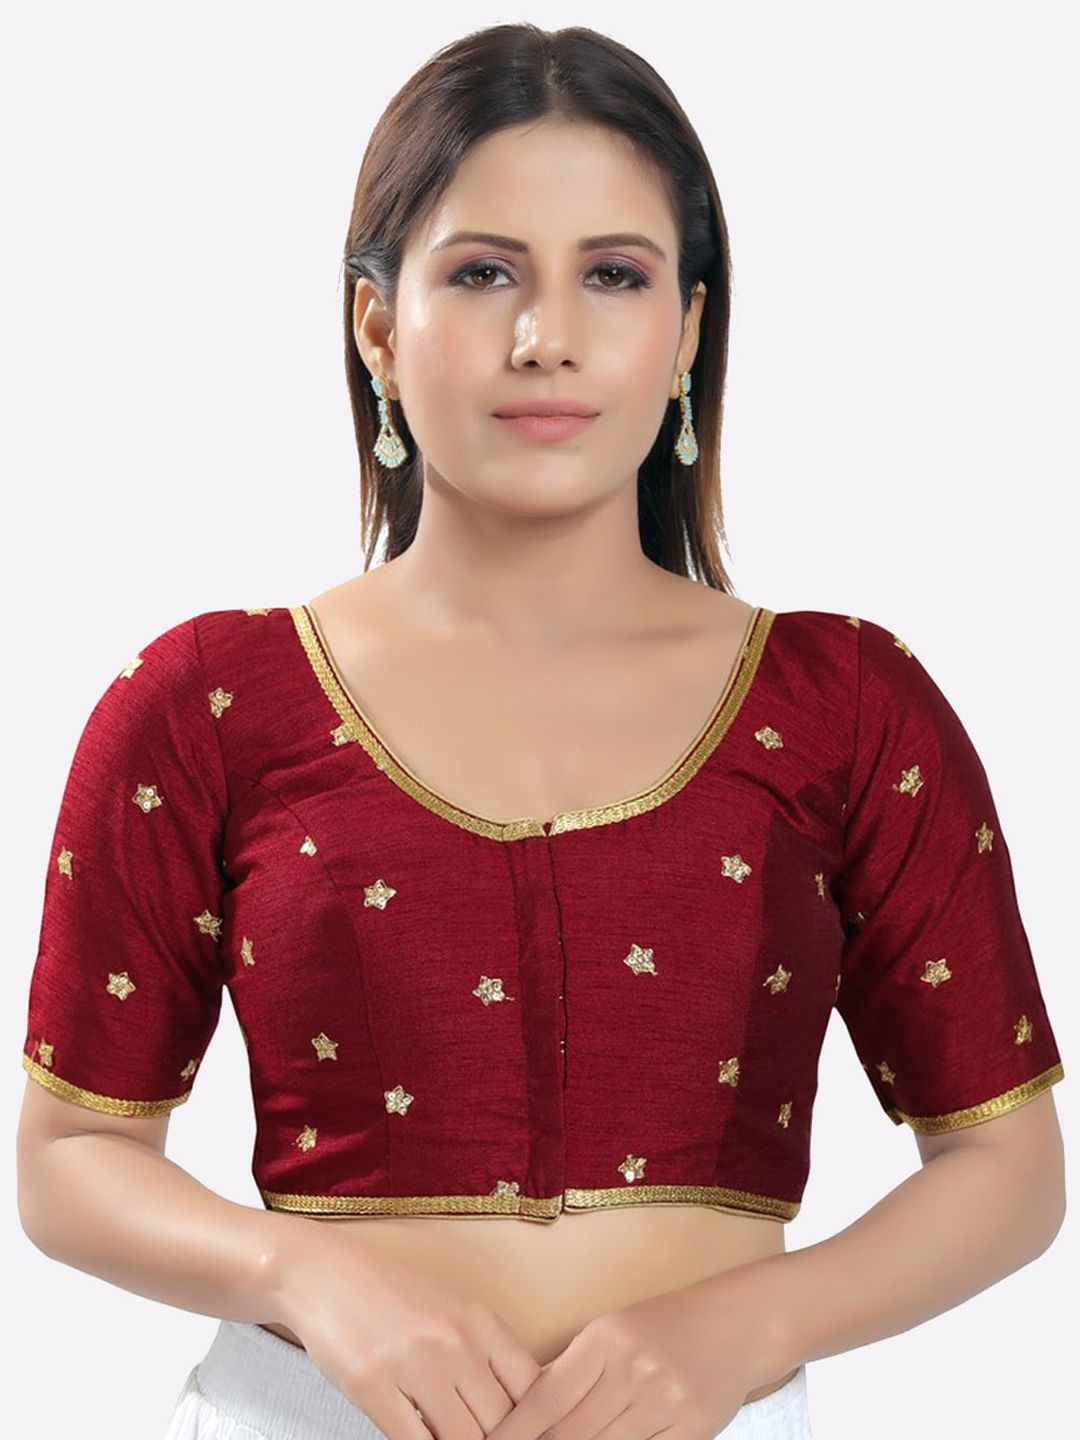 SALWAR STUDIO Women Gold-Toned & Maroon Silk Embroidered Readymade Saree Blouse Price in India